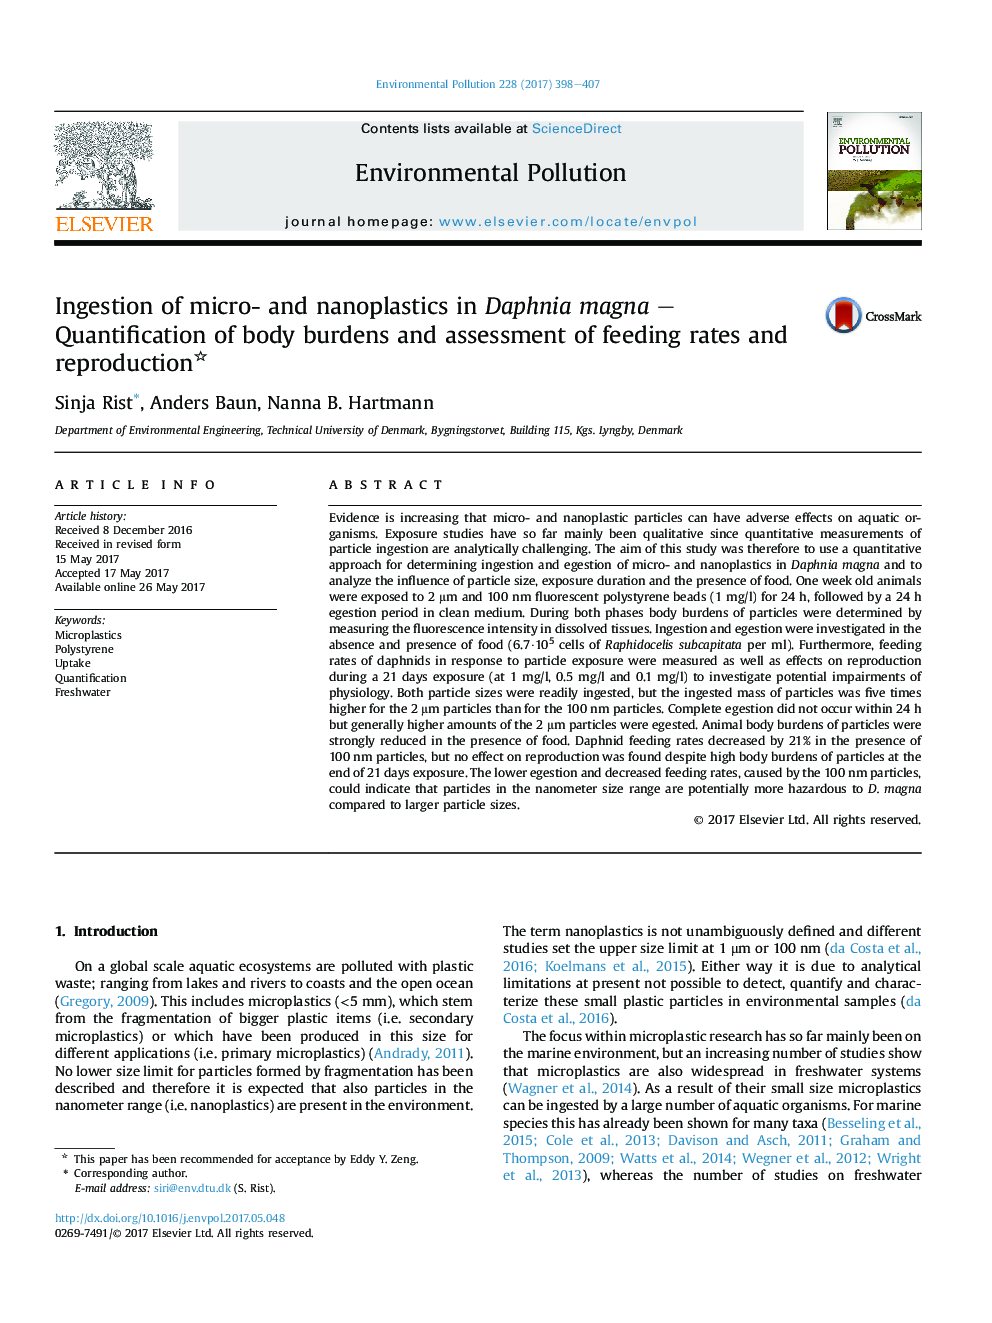 Ingestion of micro- and nanoplastics in Daphnia magna - Quantification of body burdens and assessment of feeding rates and reproduction